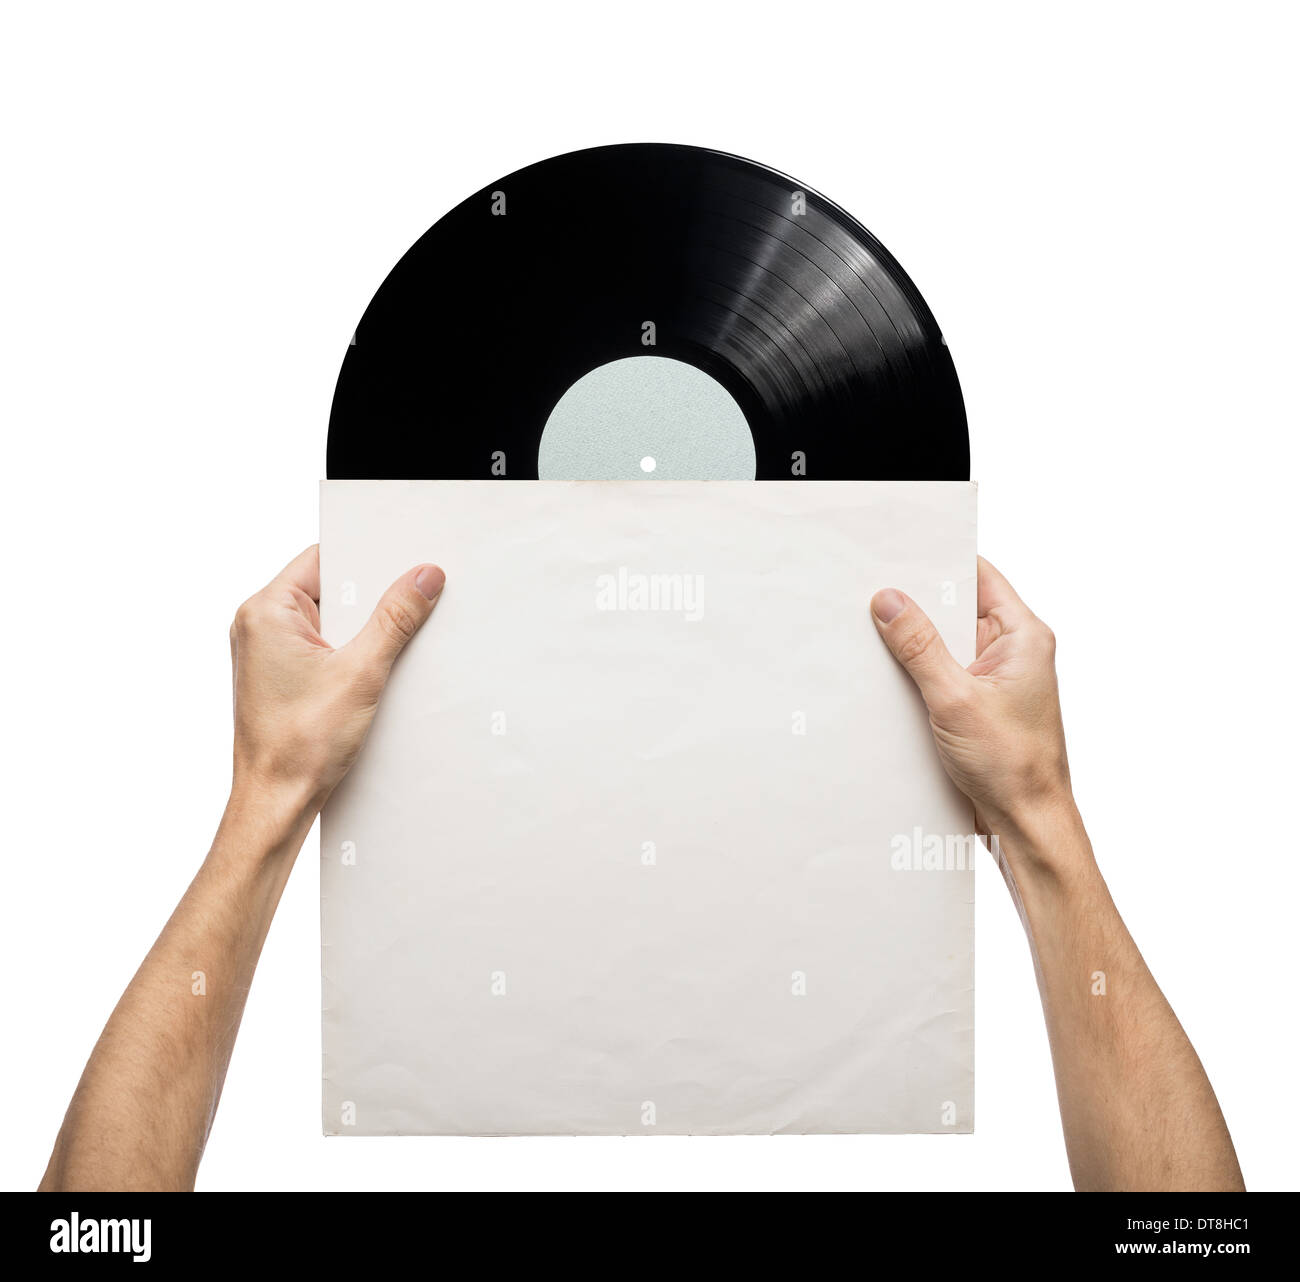 Hands holding vinyl record in a paper case Stock Photo